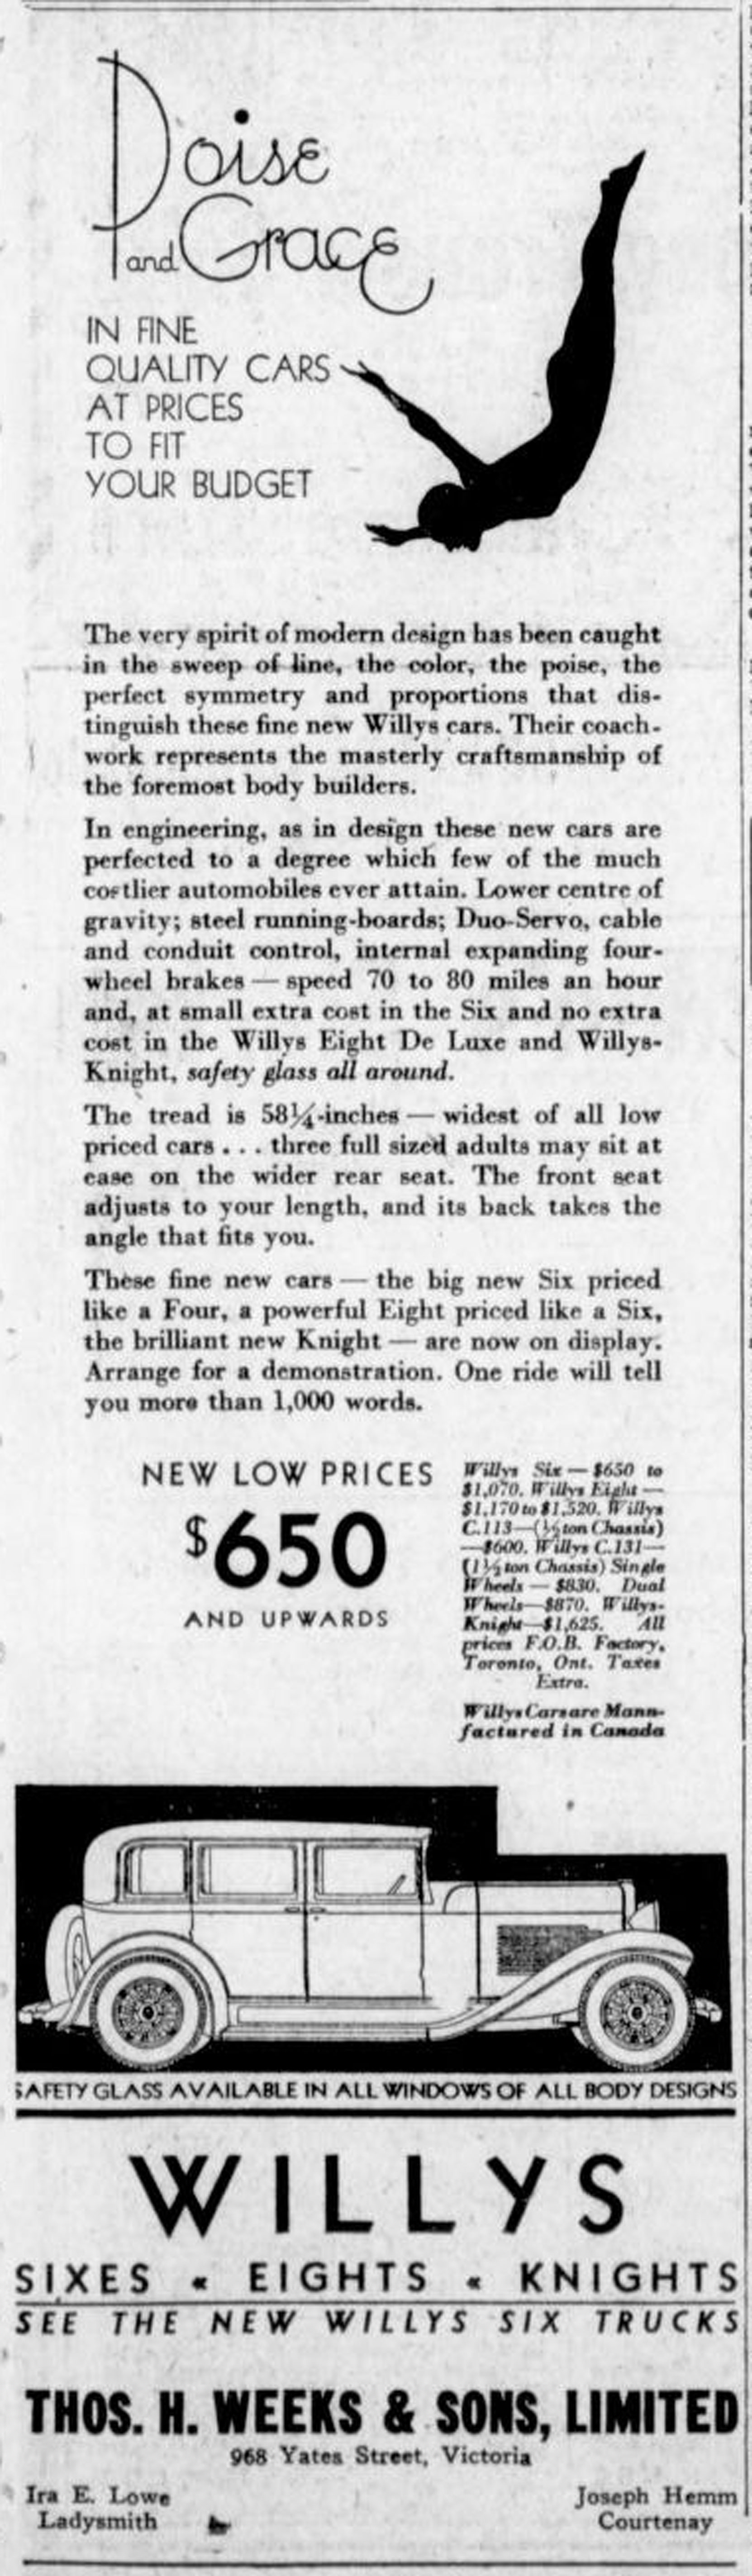 1931 advertisement for Willys cars and trucks, sold by Thomas H. Weeks & Sons Ltd,, 968 Yates Street (Victoria Online Sightseeing Tours collection)